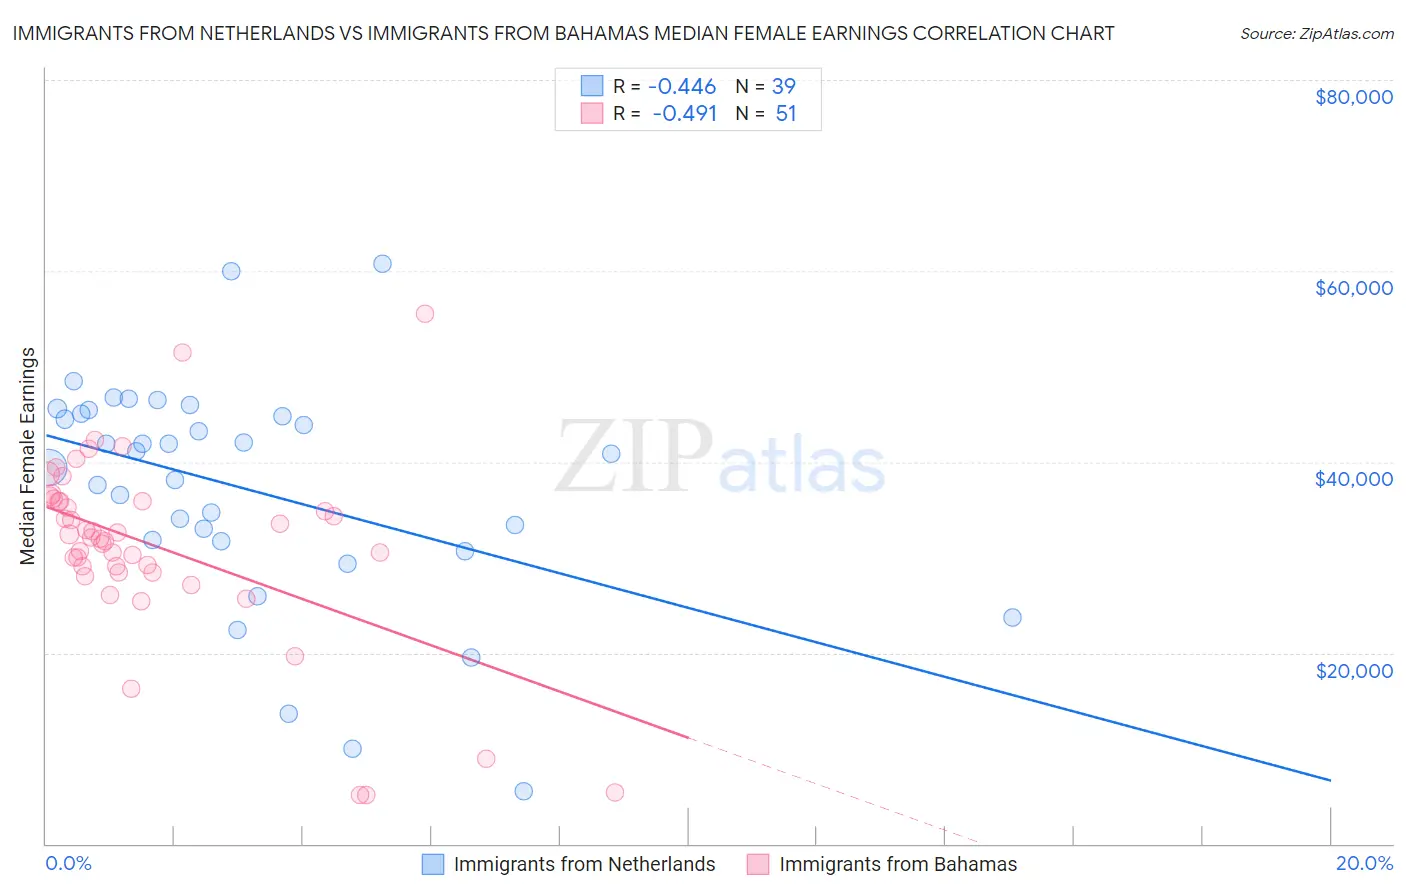 Immigrants from Netherlands vs Immigrants from Bahamas Median Female Earnings